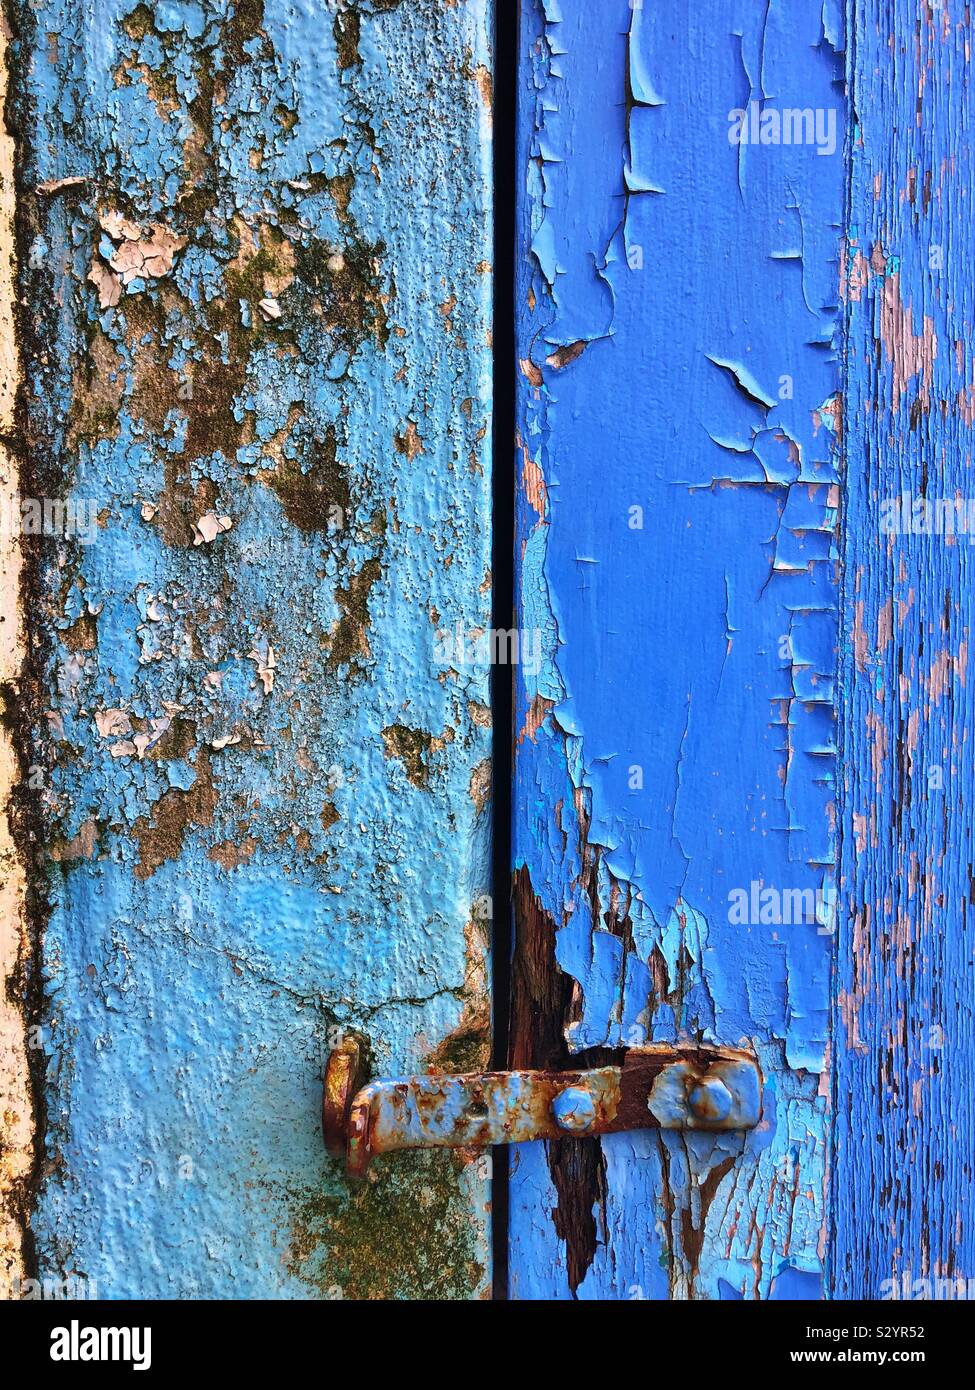 Latch on an old blue painted wooden door. Stock Photo